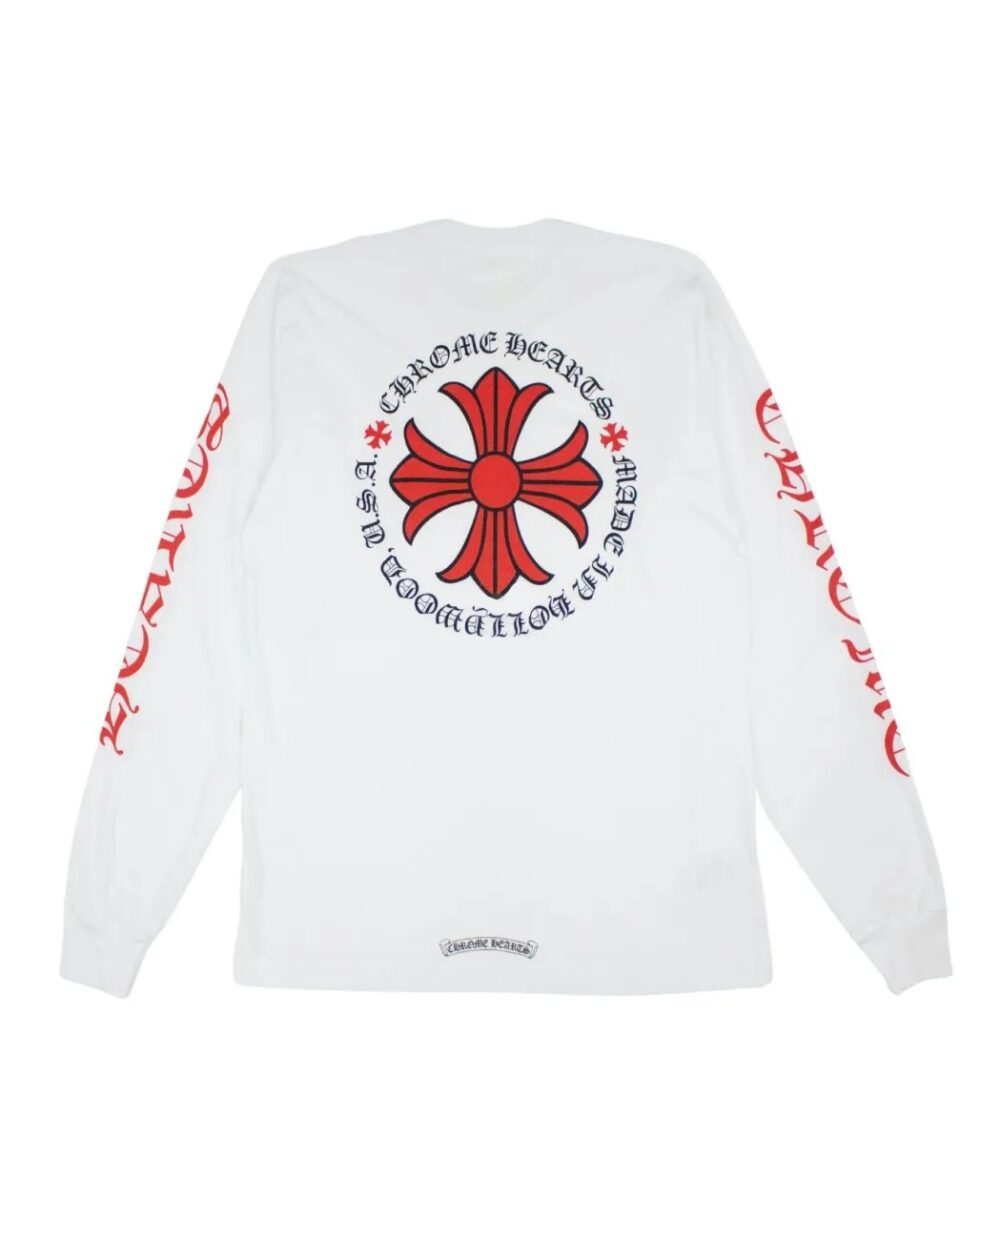 "White long sleeve shirt with the Chrome Hearts Plus Cross design made in Hollywood."